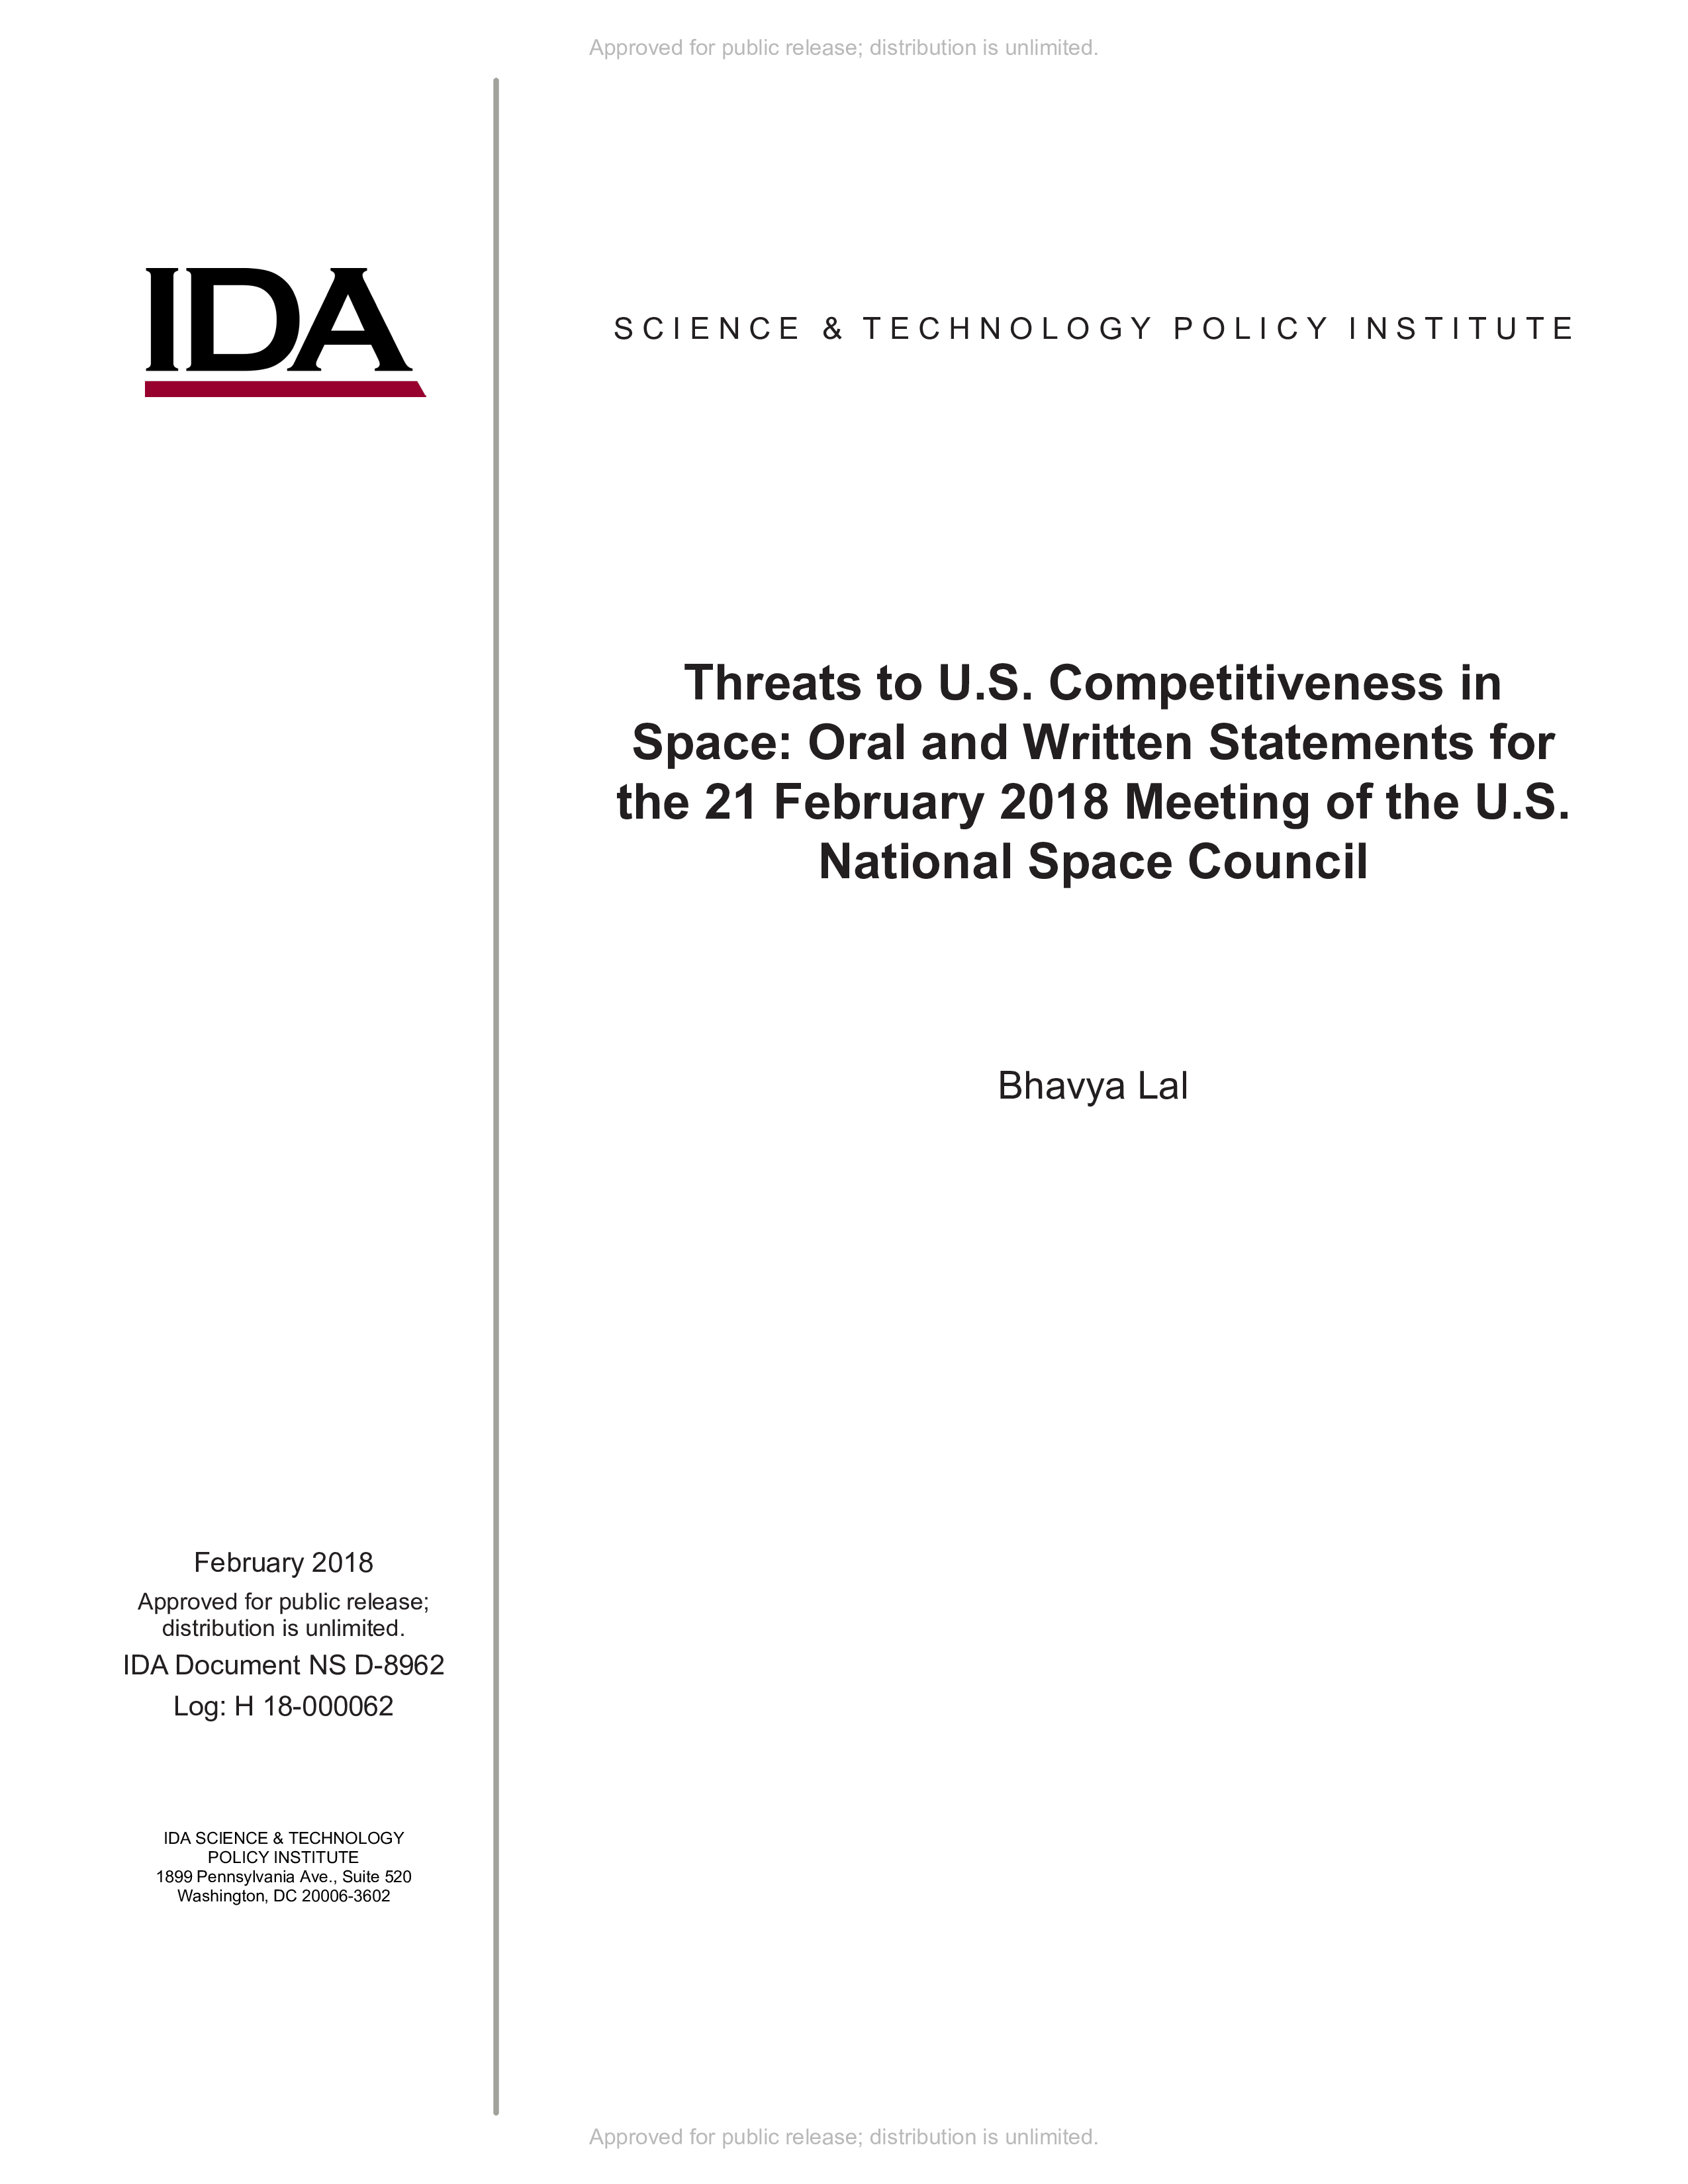 Threats to U.S. Competitiveness in Space: Oral and Written Statements for the 21 February 2018 Meeting of the U.S. National Space Council